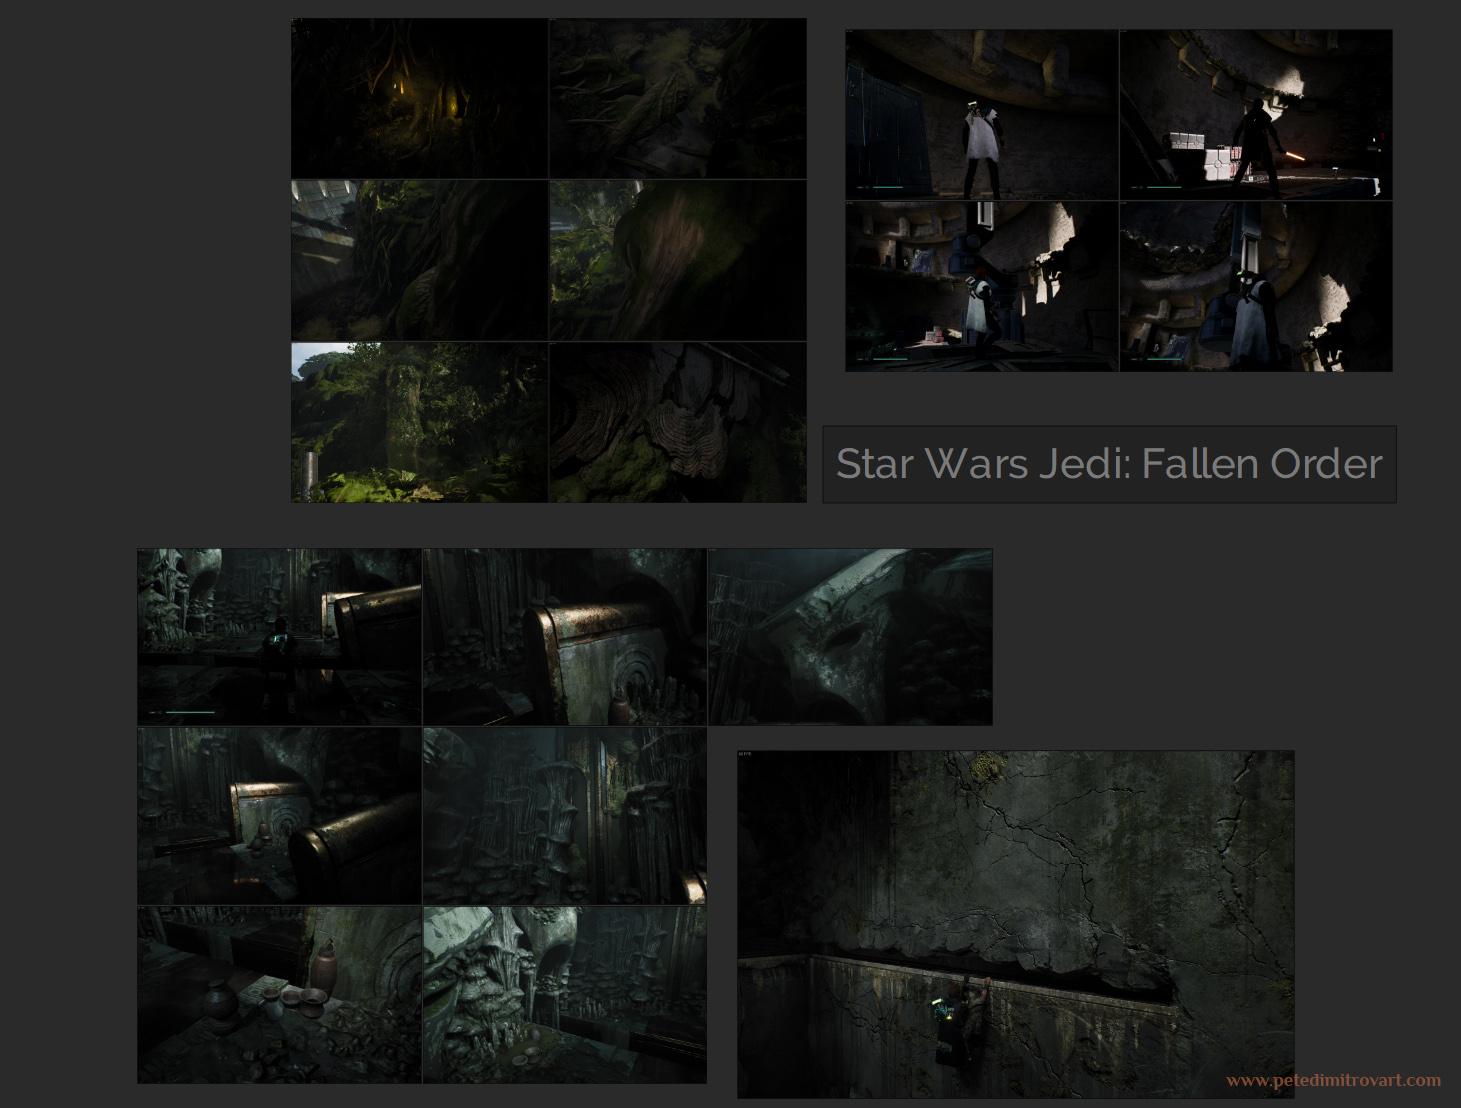 Lots of Fallen Order screenshots put into one place. Top left shows greenery, canopies and tree barks. Right is plaster walls. Below are ritual spaces with golden motives and lots of stalagmites and moist texturing.